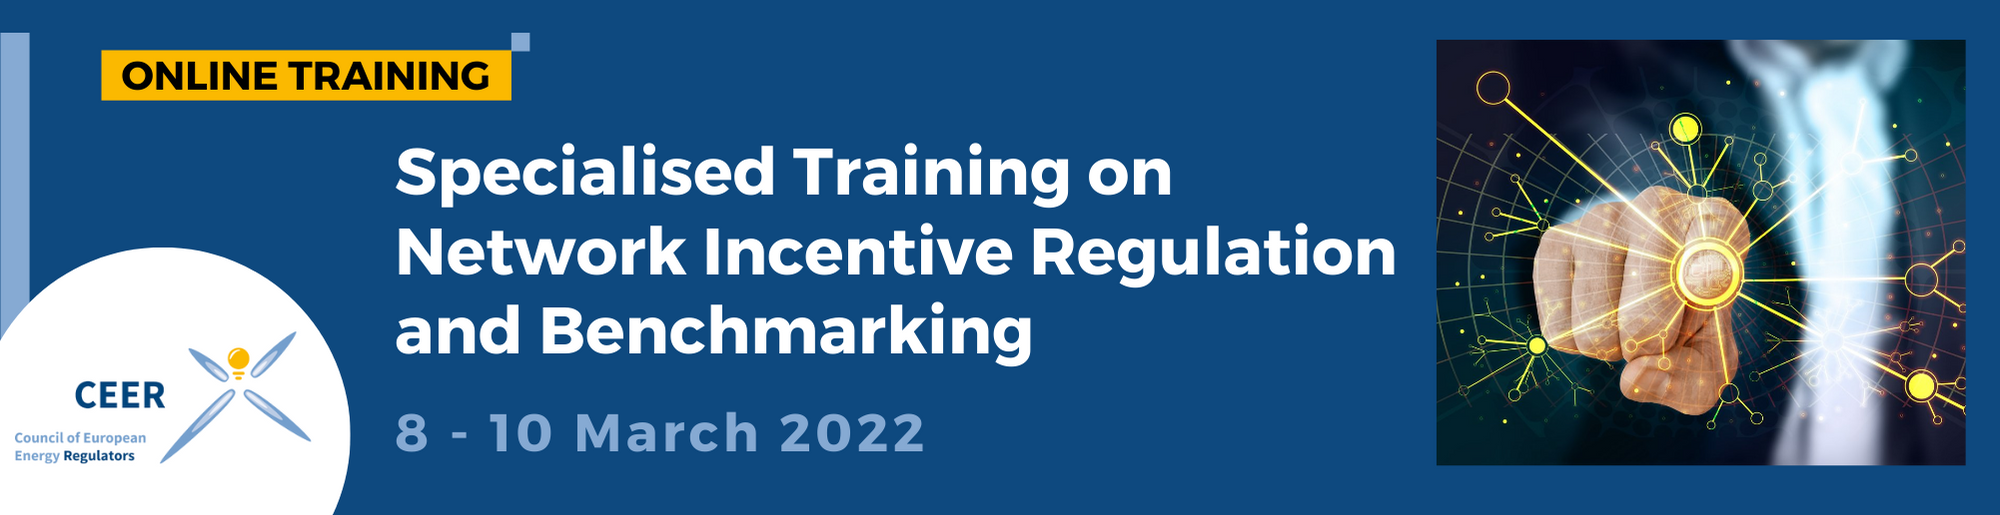 Specialised Training on Network Incentive Regulation and Benchmarking 